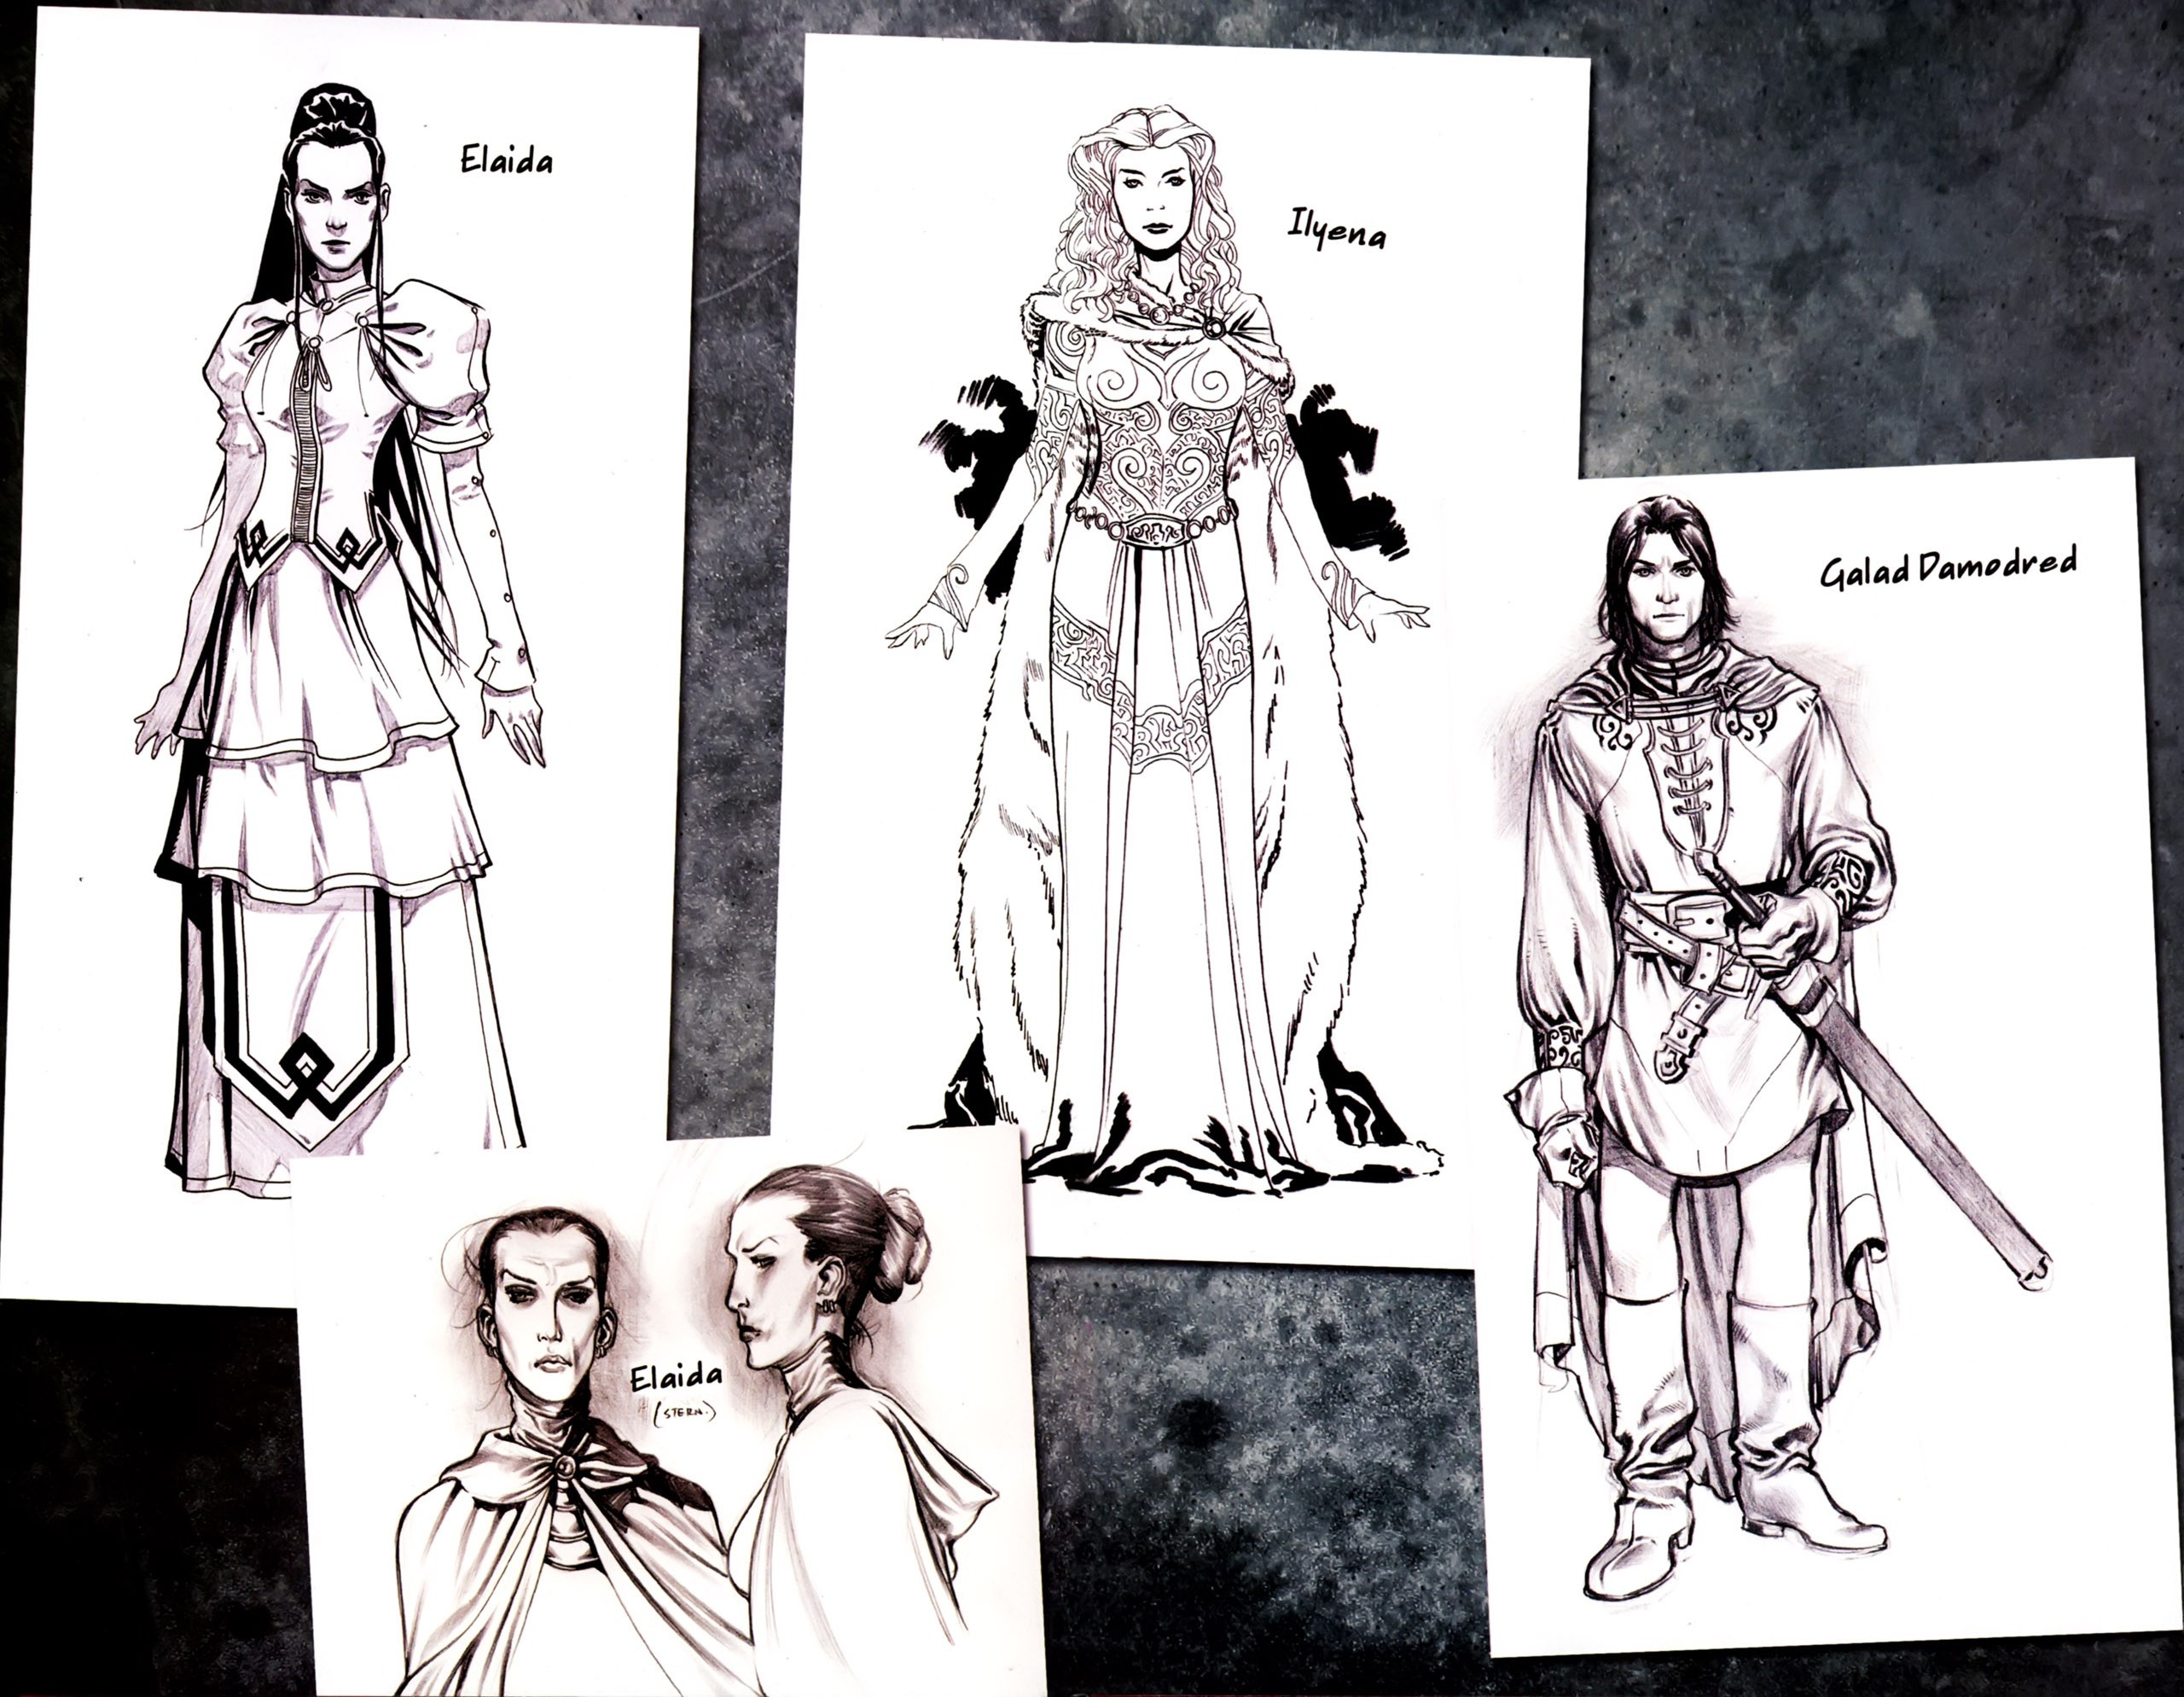 General 2560x1989 The Wheel of Time concept art monochrome drawing